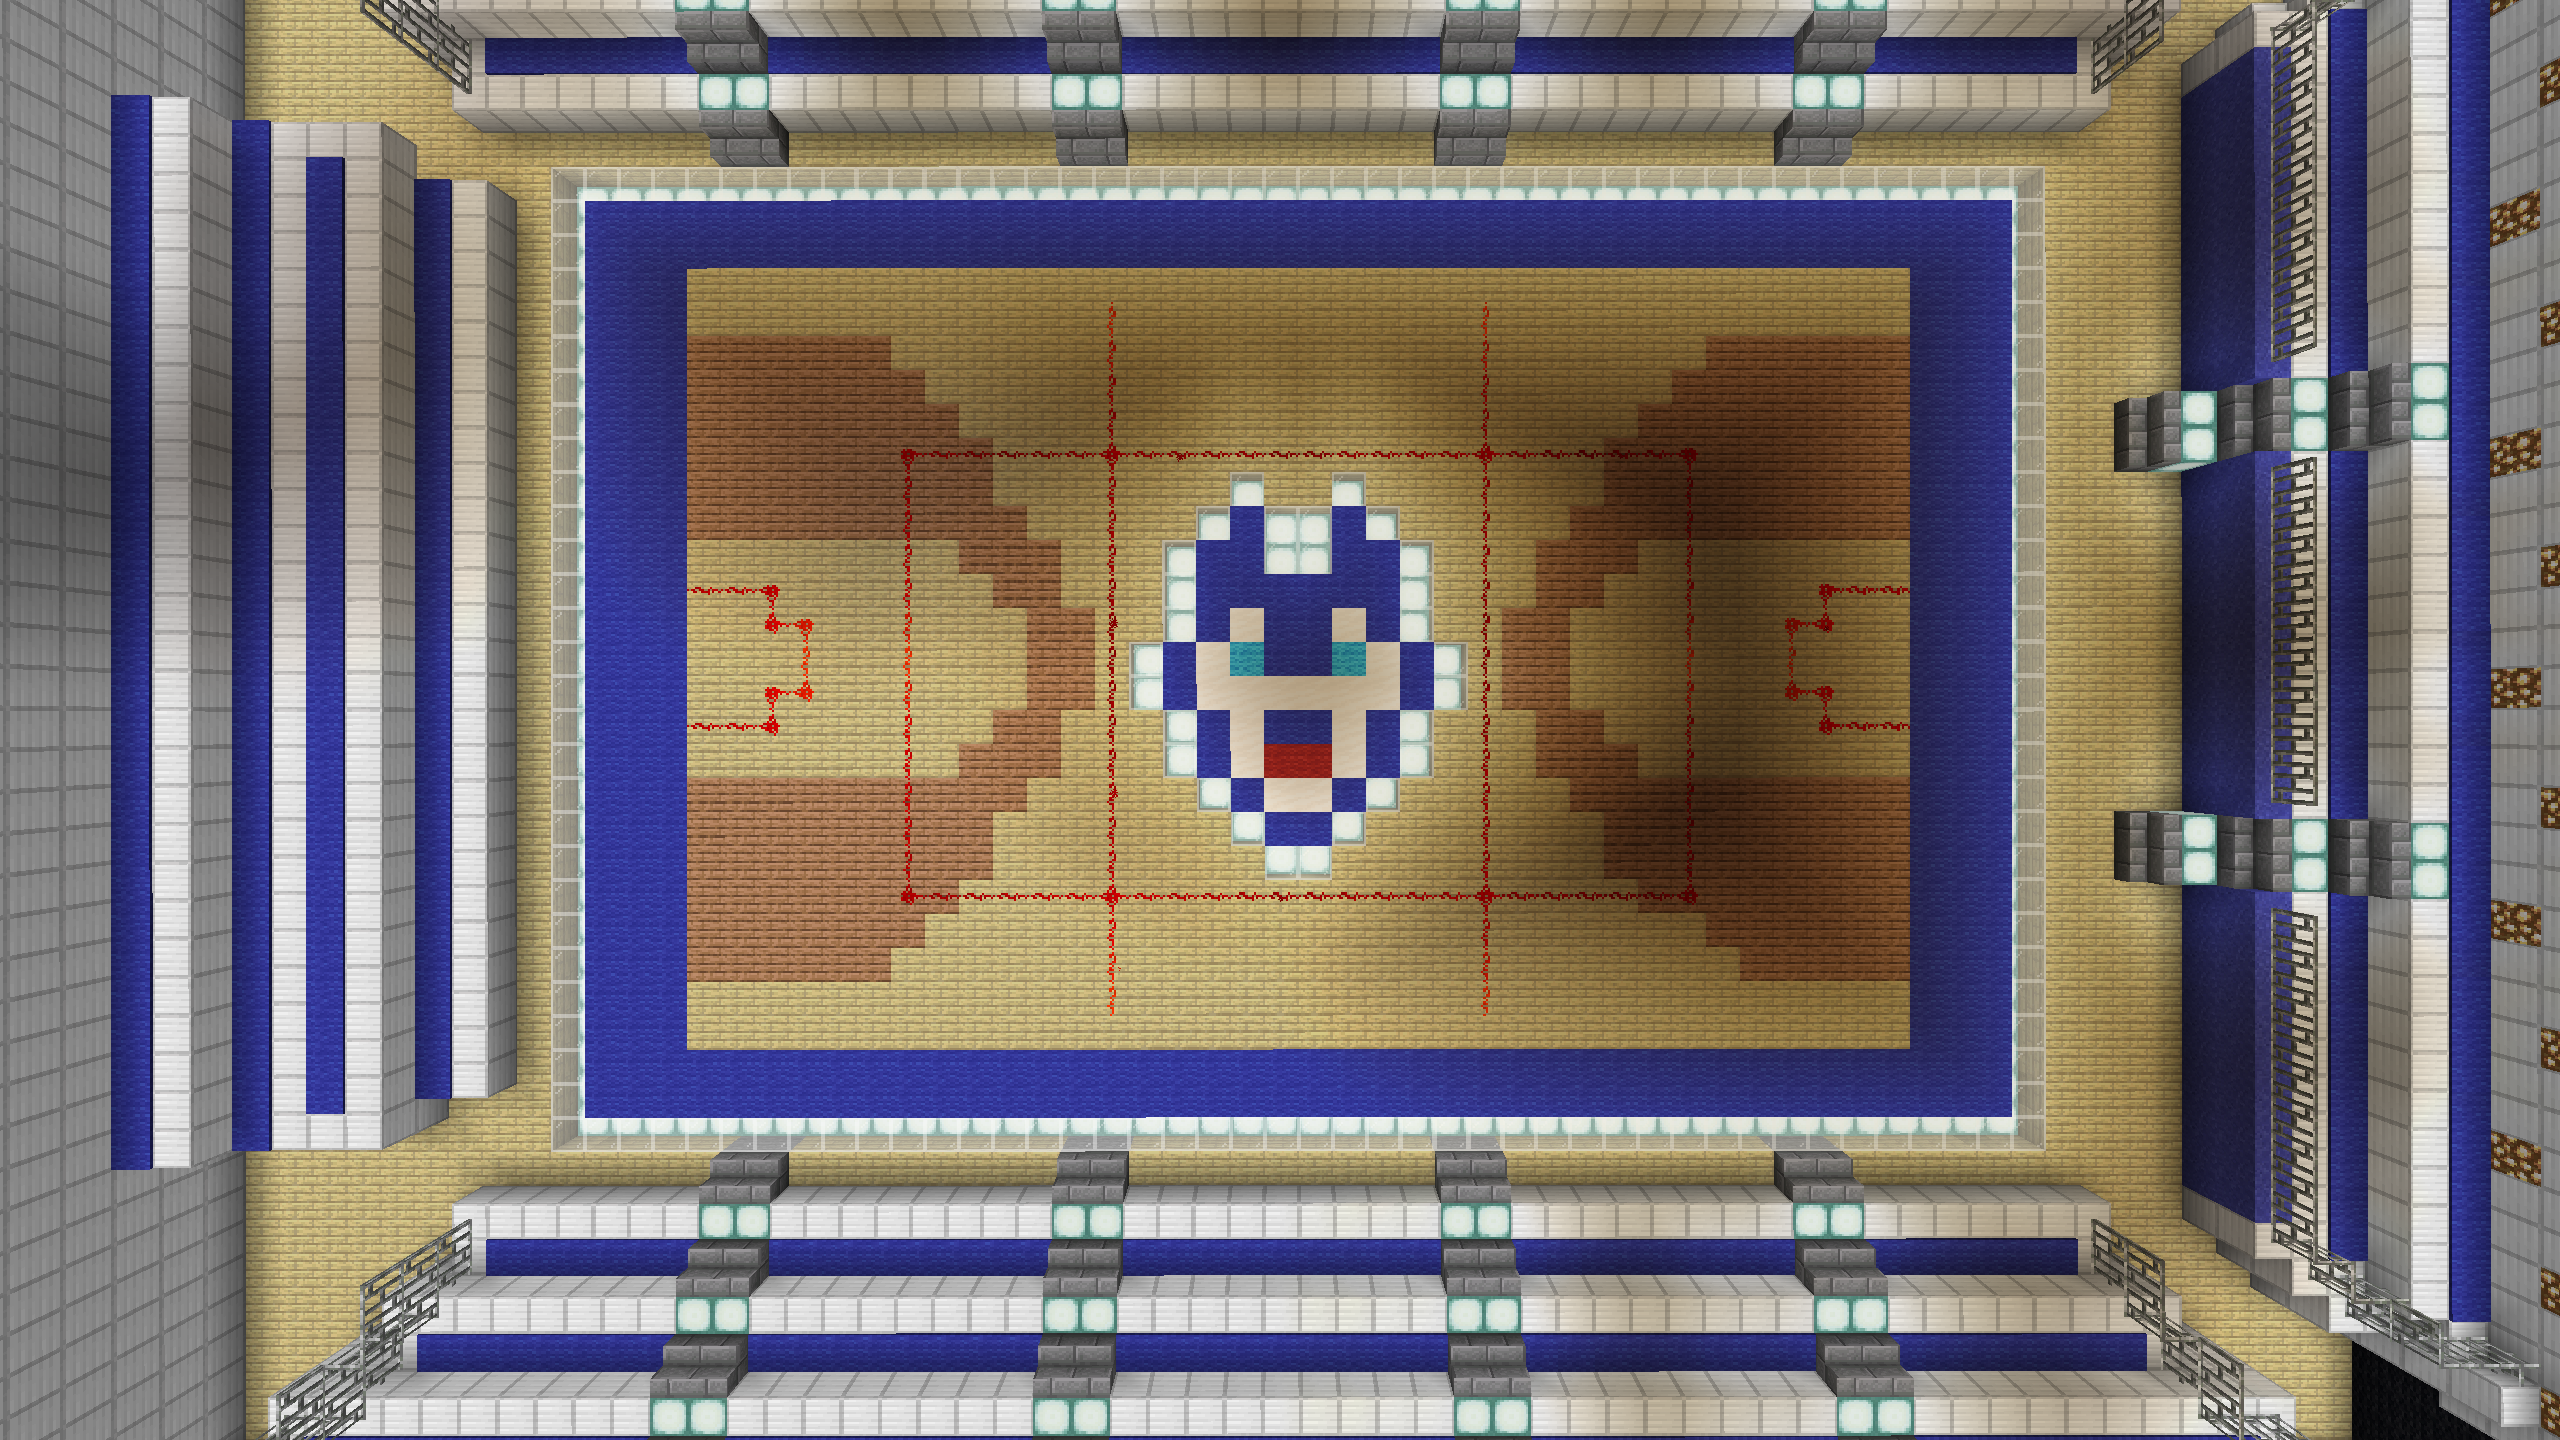 The iconic Gampel Pavilion floor, as it looks in Minecraft.